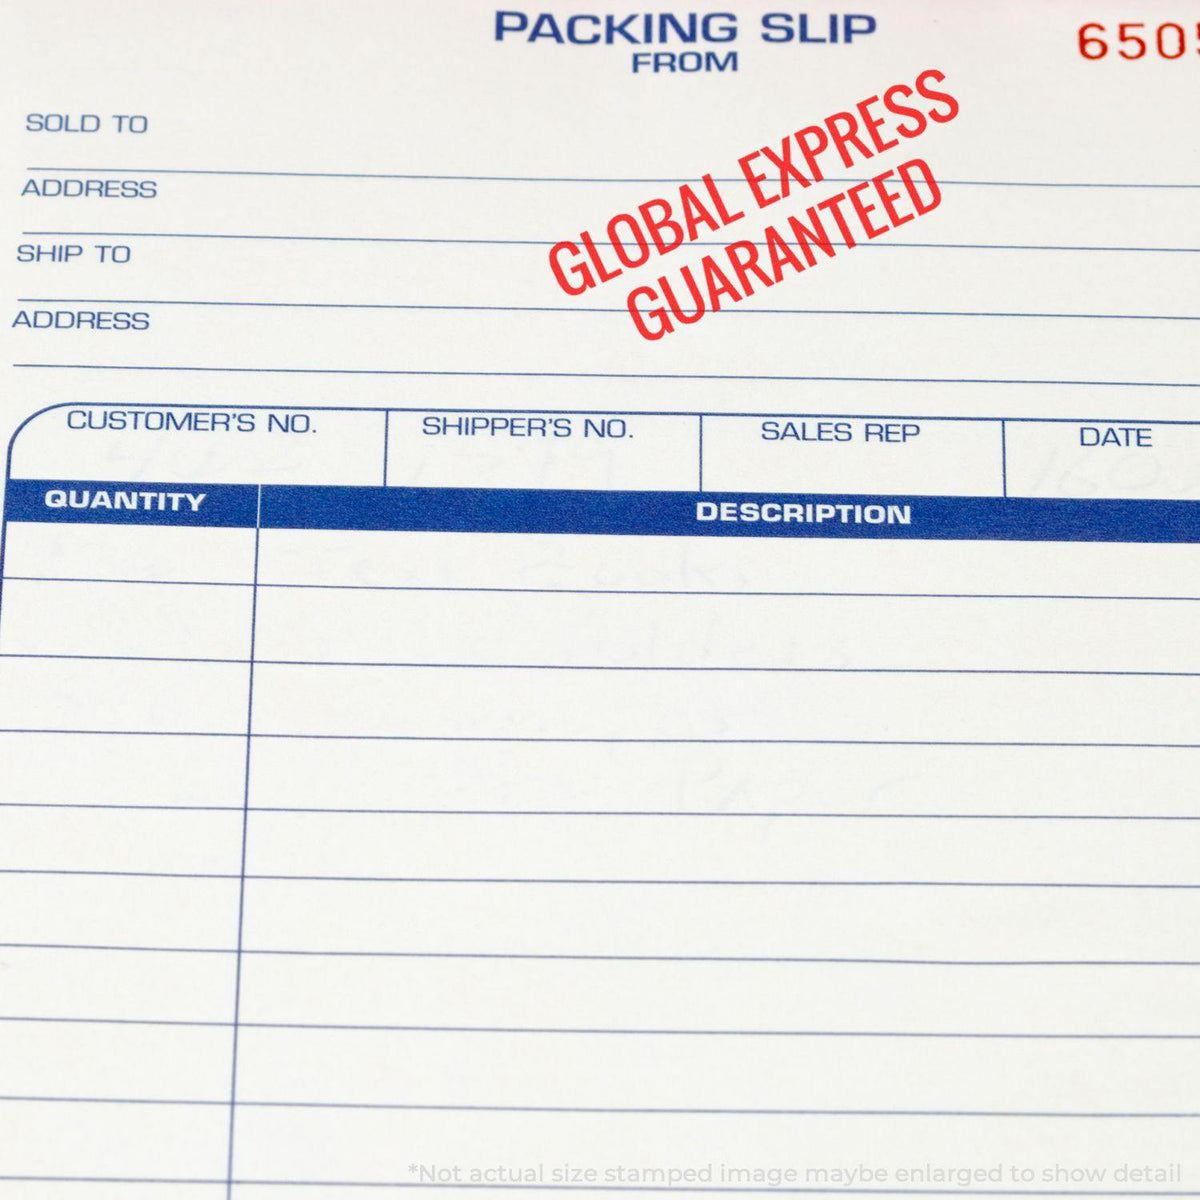 Global Express Guaranteed Rubber Stamp Lifestyle Photo